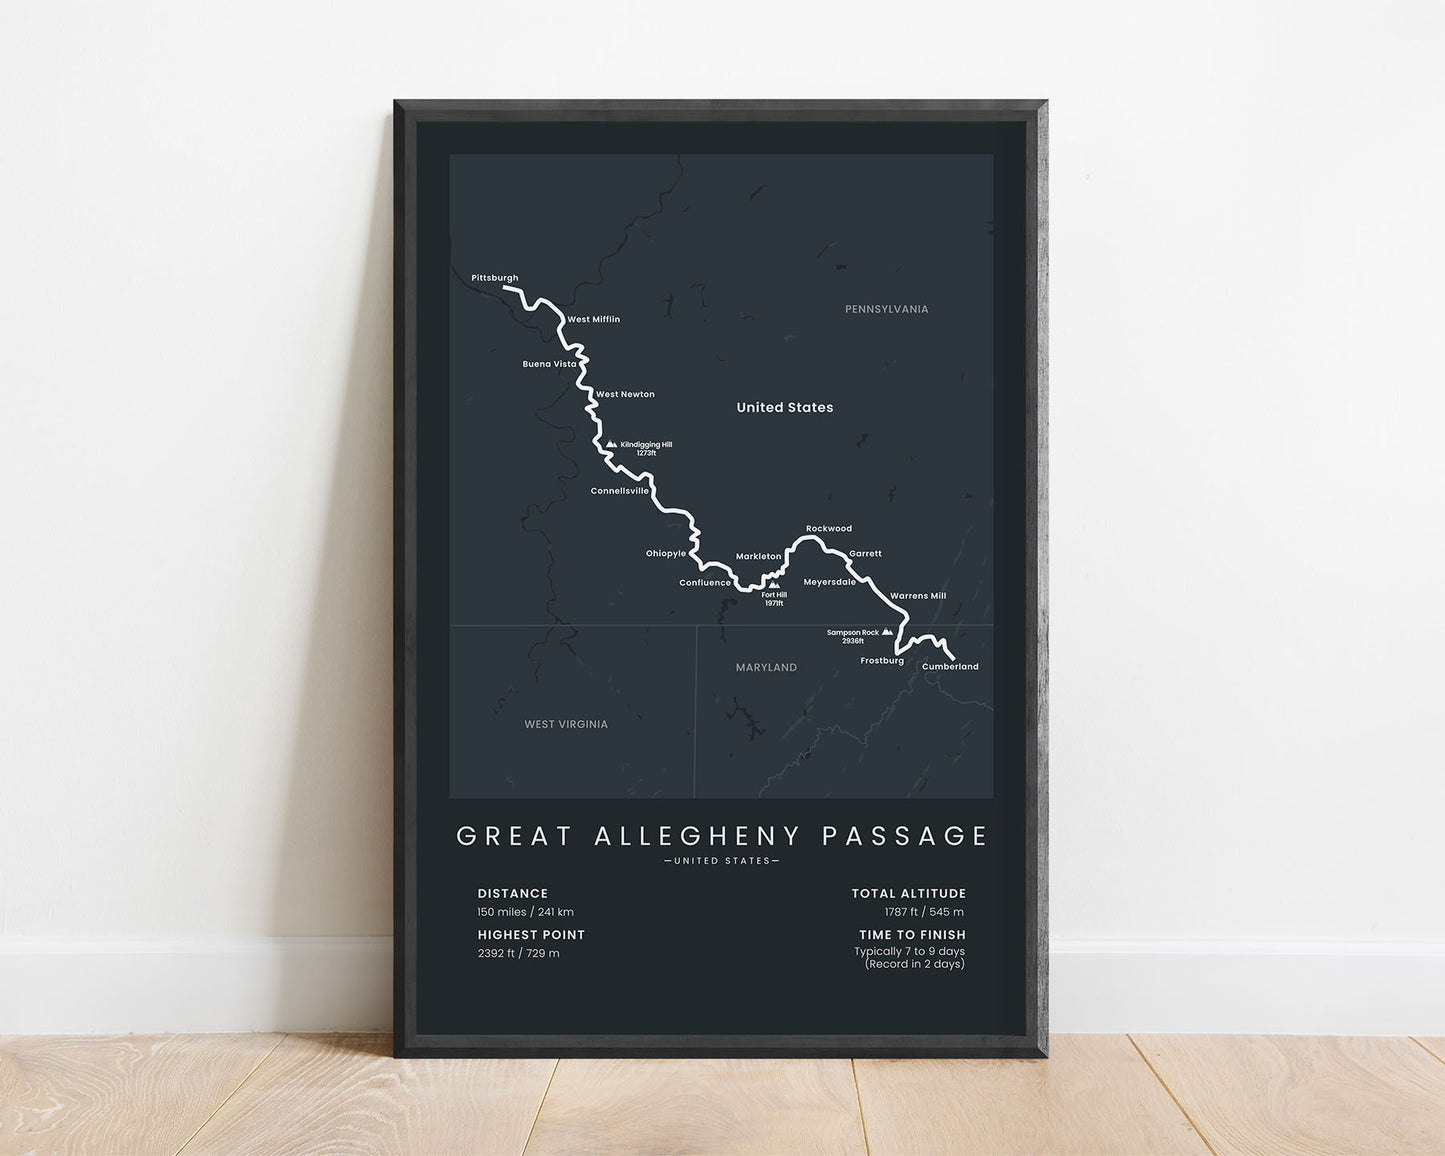 Great Allegheny Passage (Cumberland to Pittsburgh) Trek Wall Art with Black Background